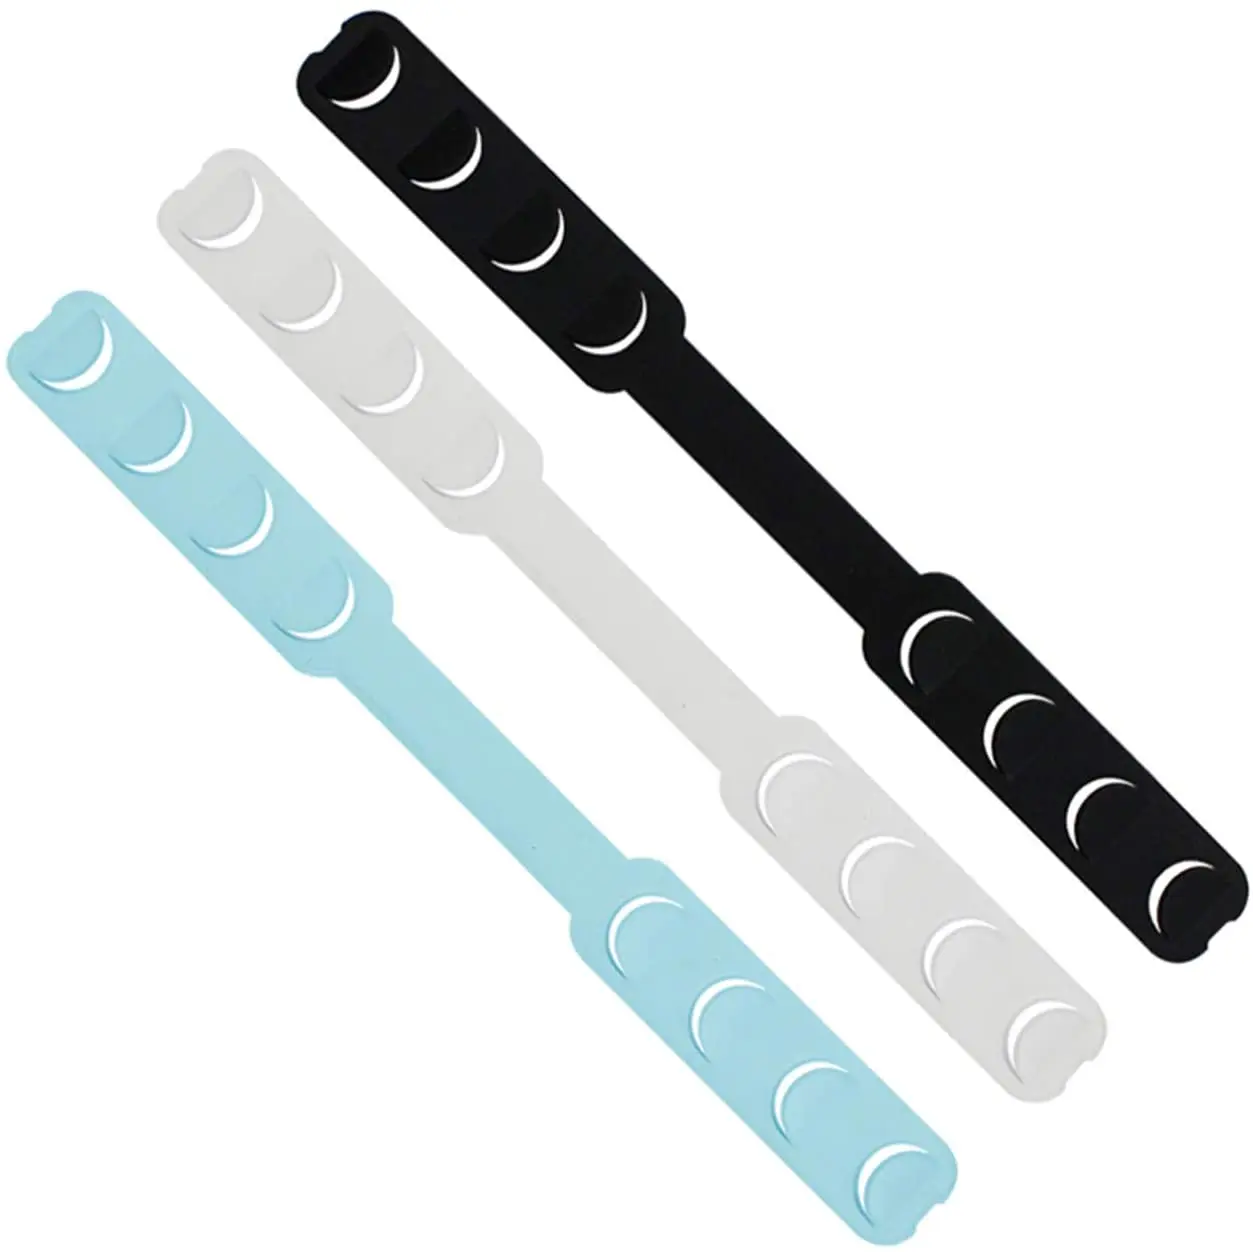 

Amazon Hot sale factory price Extender hook Anti-Slip Ear Clips Grips Band Extension Hook Adjustable Buckle Elastic Strap, Blue,black,white